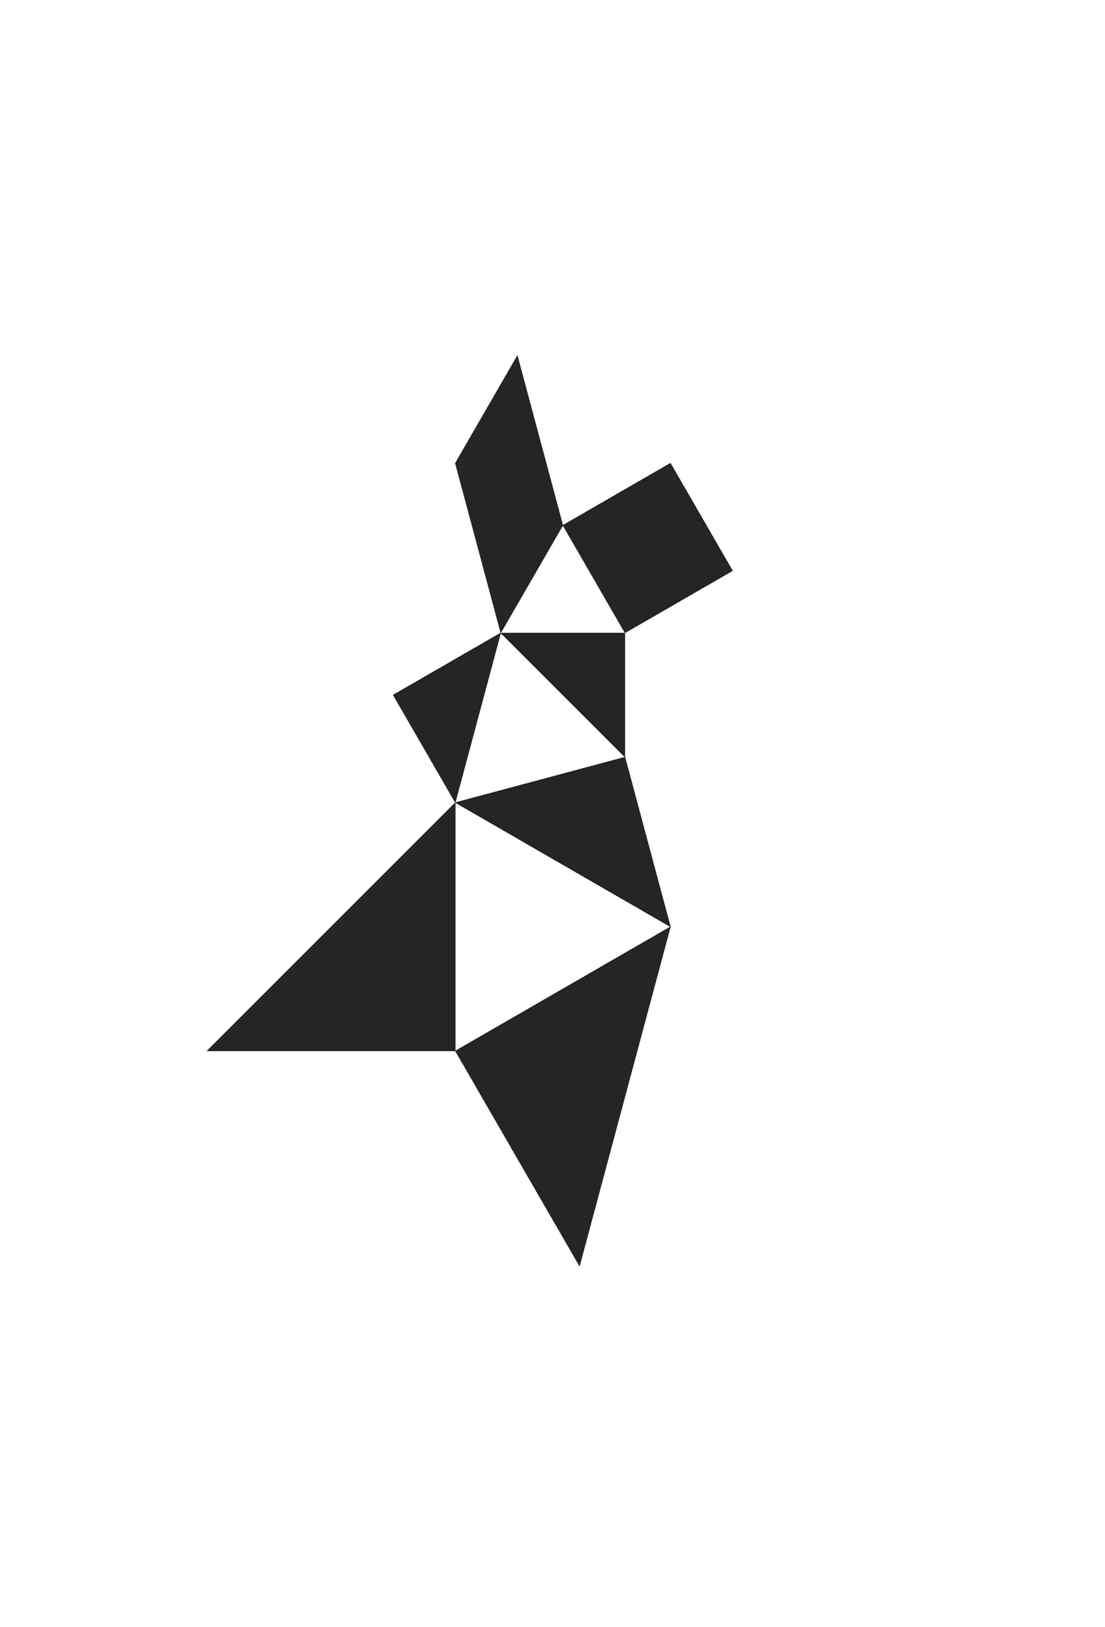 Image for entry 'Rule and Form - Rule 04 - Corners are touching each other, in the space in between equilateral triangles arise.'